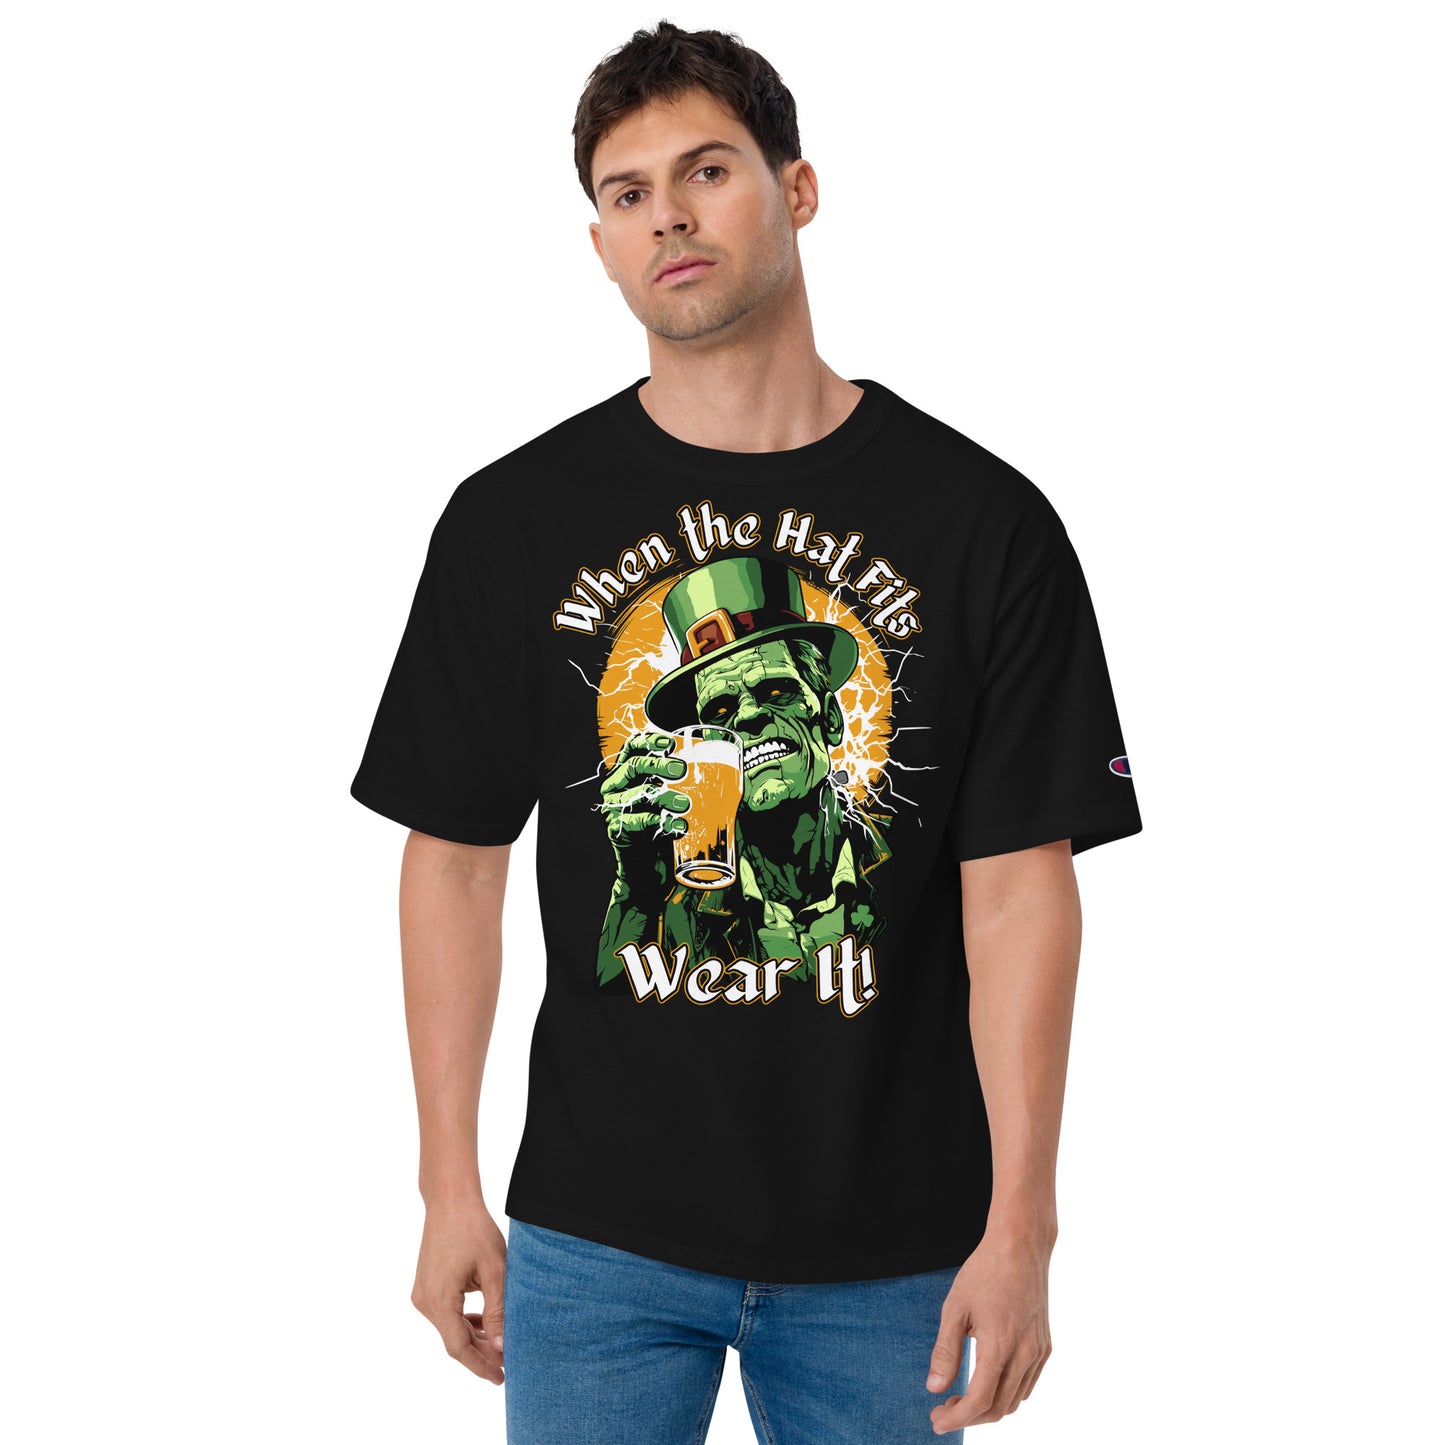 When the hat fits Men's Champion Relaxed Fit T-shirt